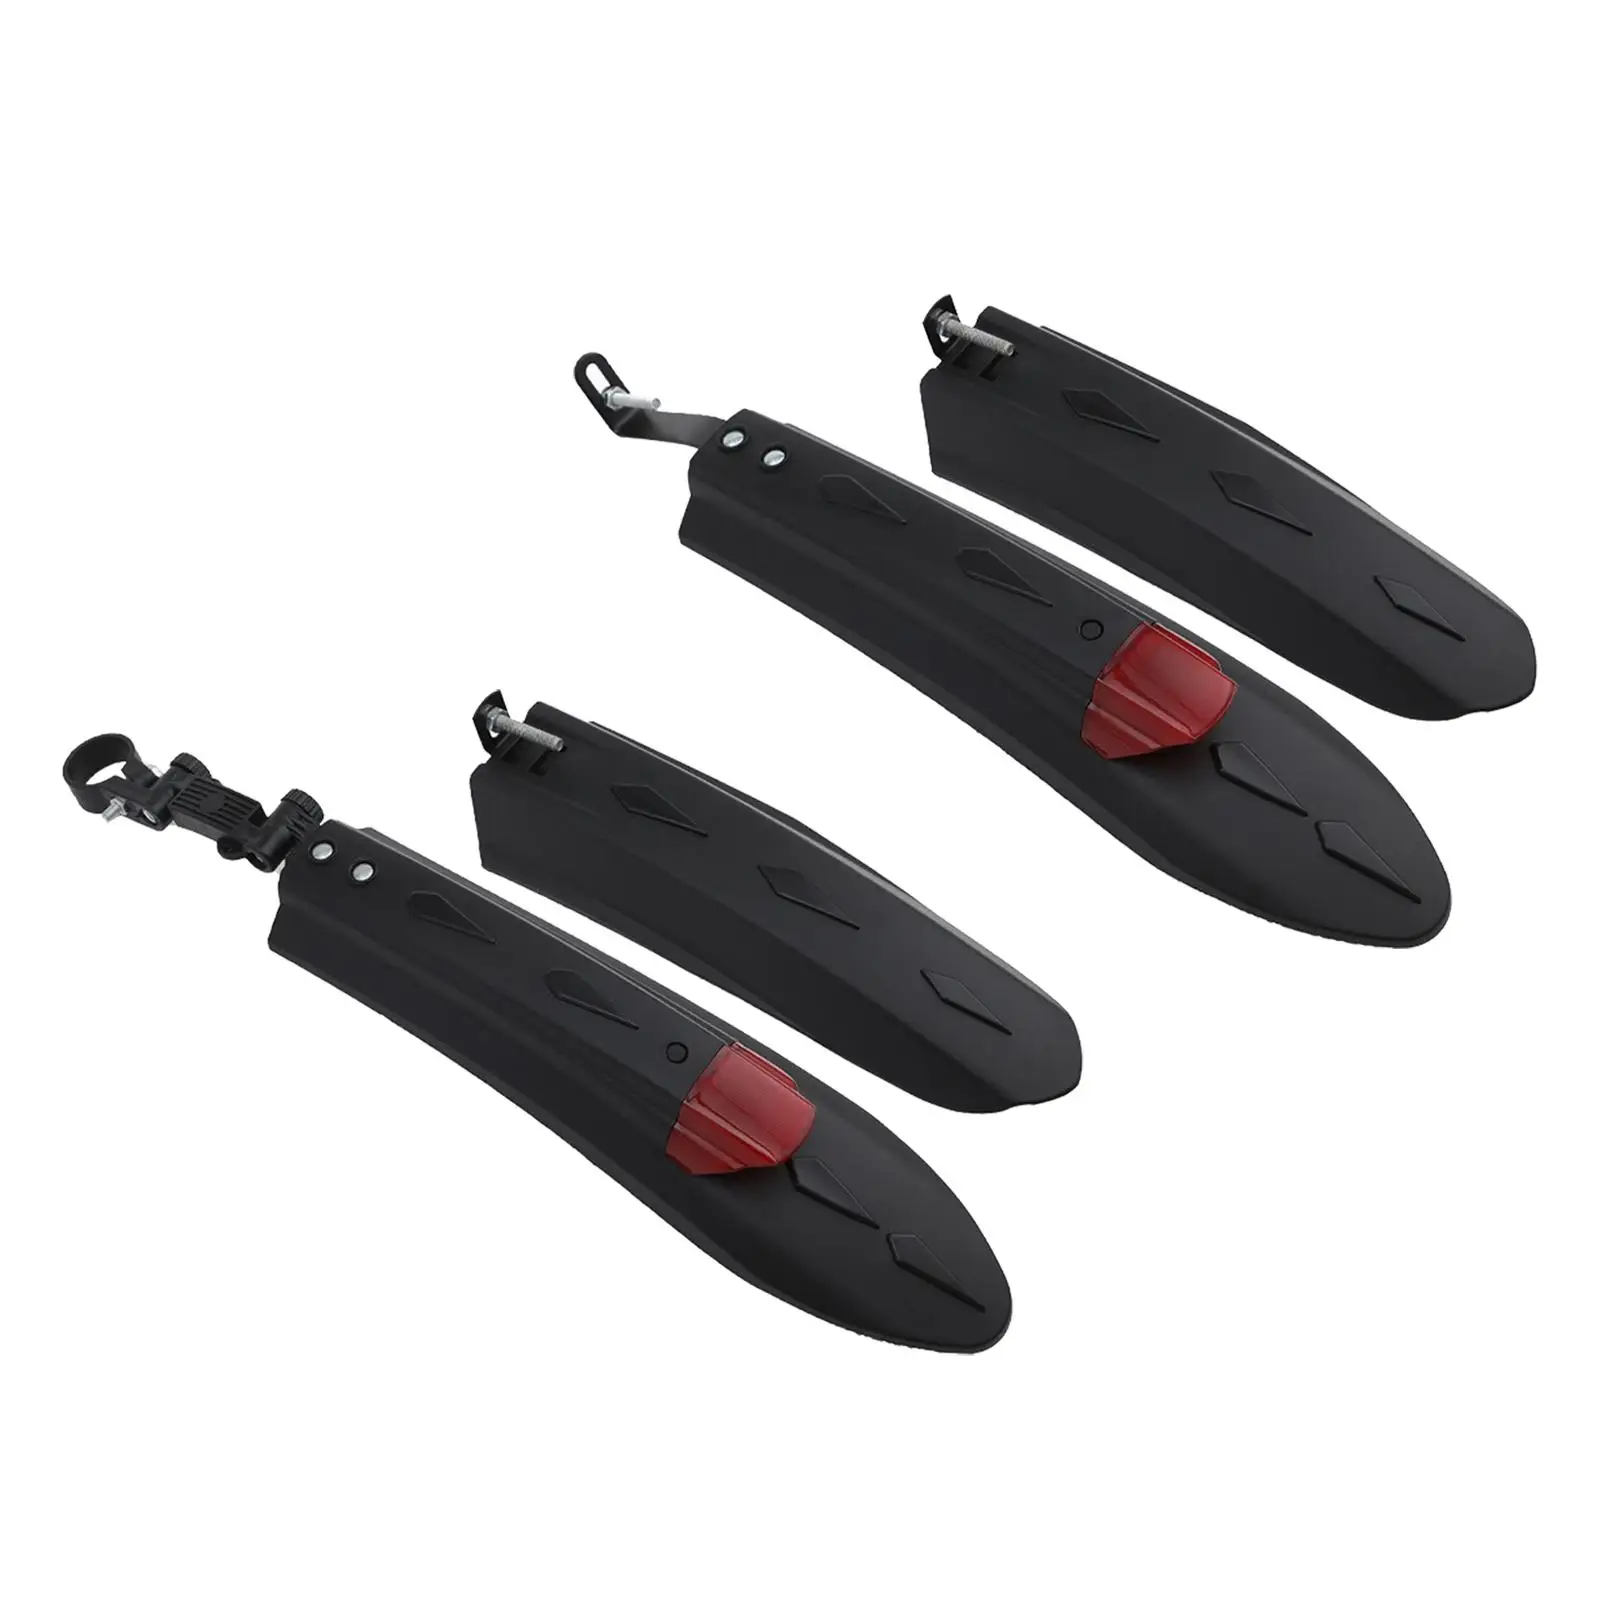 Bike Mudguard Set Wheel Protection Portable Easy Installation Supplies Mudflap for Sports Travel Outdoor Road Bike Accessories